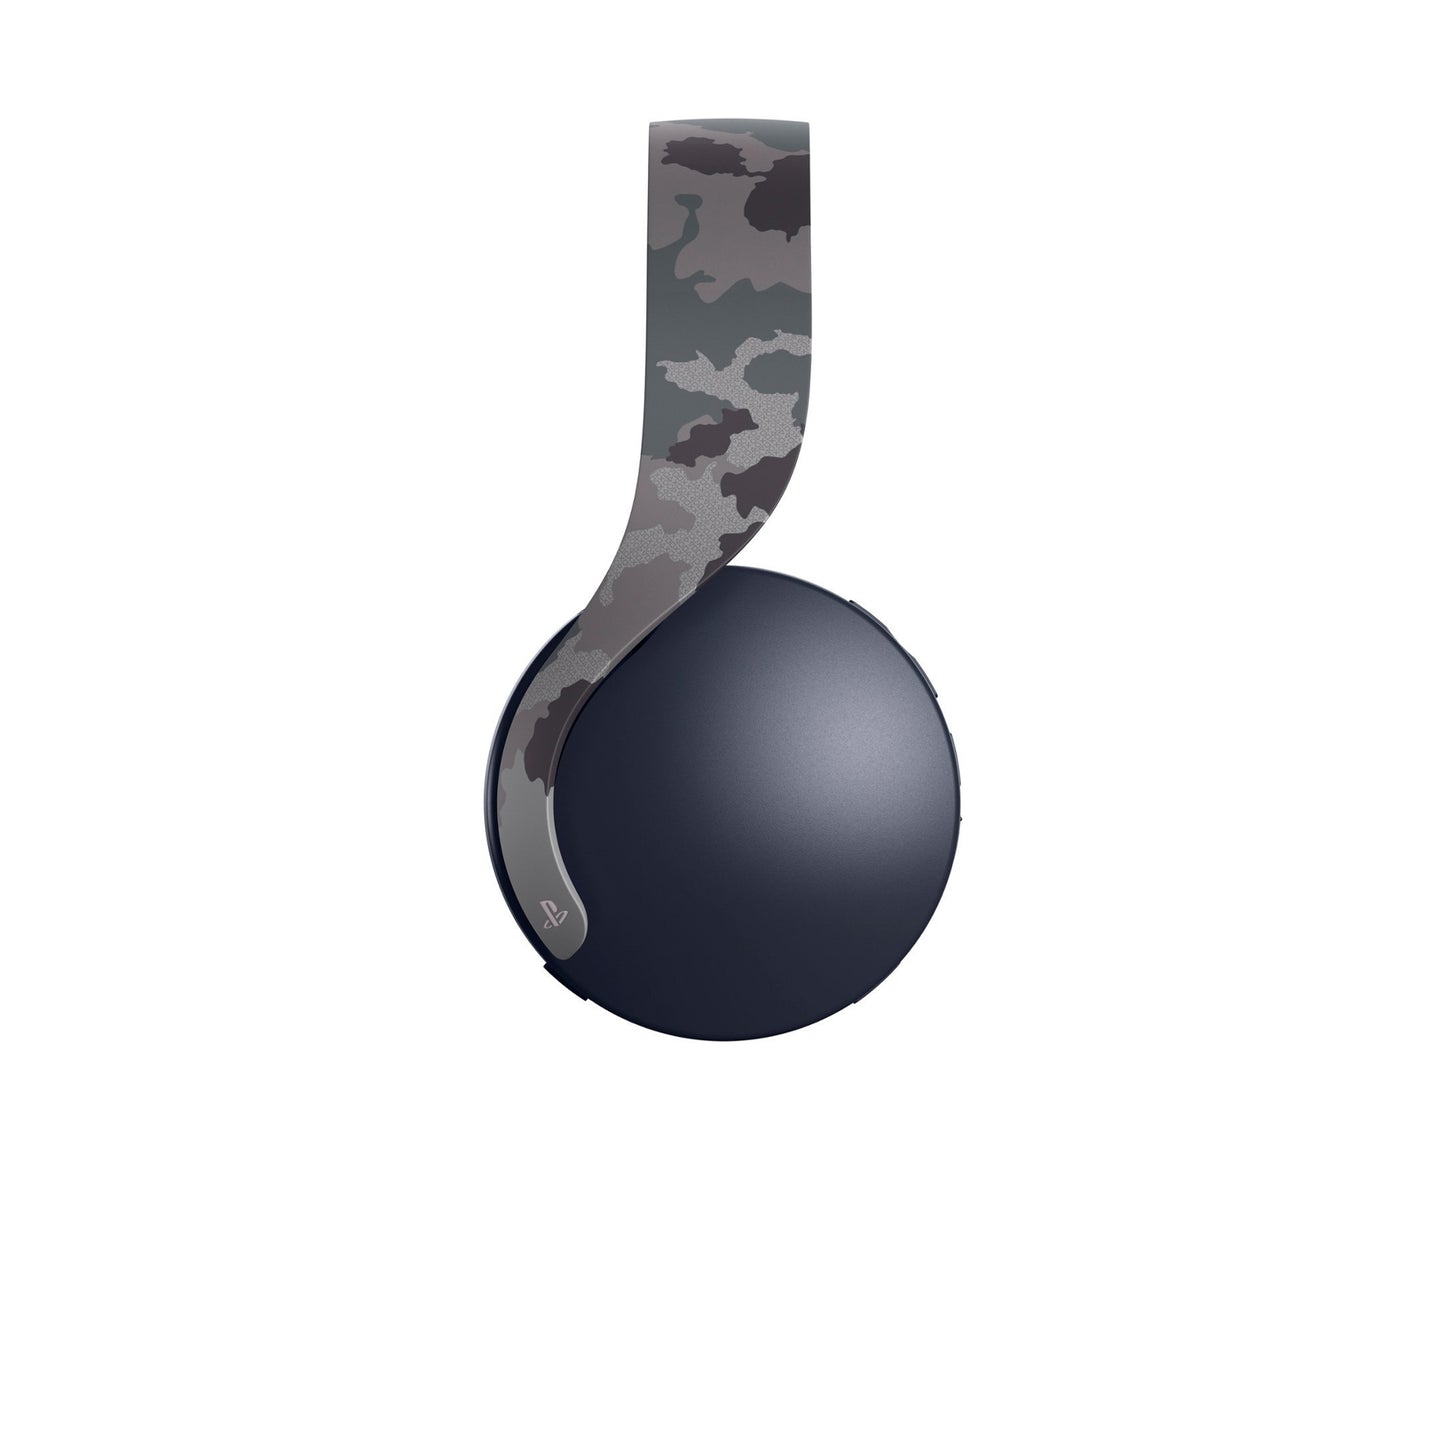 Sony - PULSE 3D Wireless Gaming Headset for PS5, PS4, and PC - Gray Camouflage